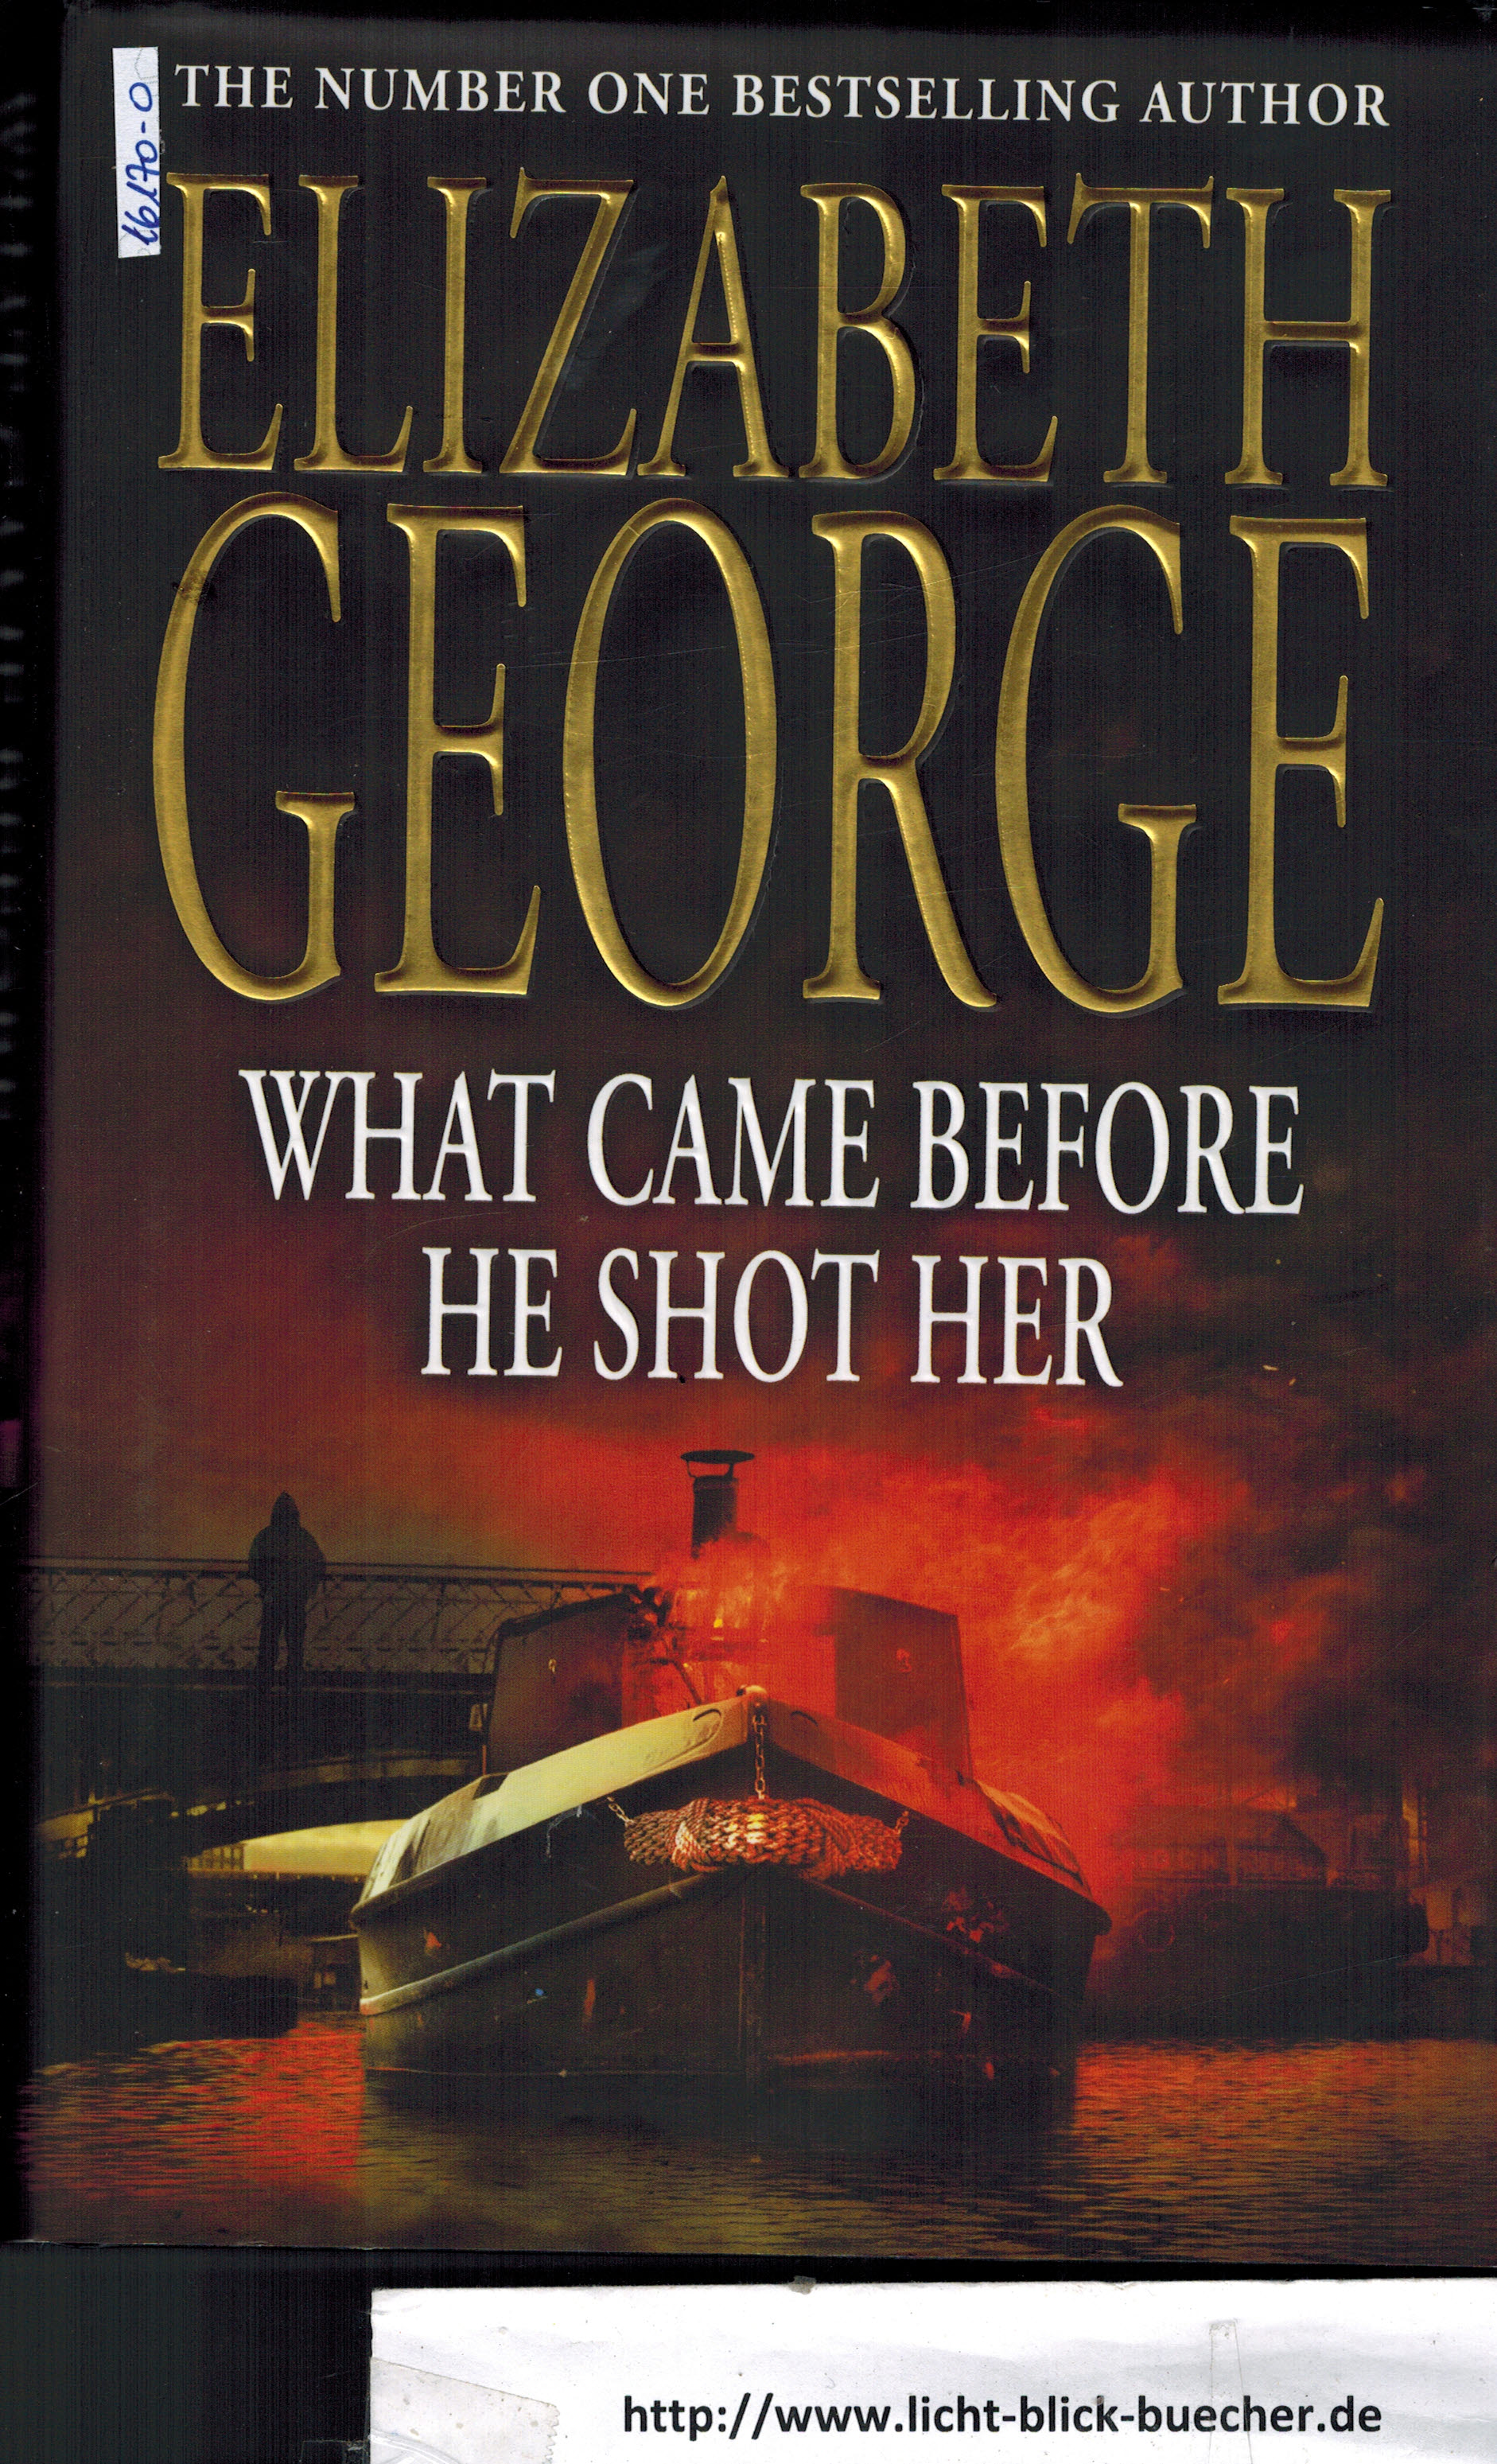 What Came Before He Shot Her ELIZABETH GEORGE